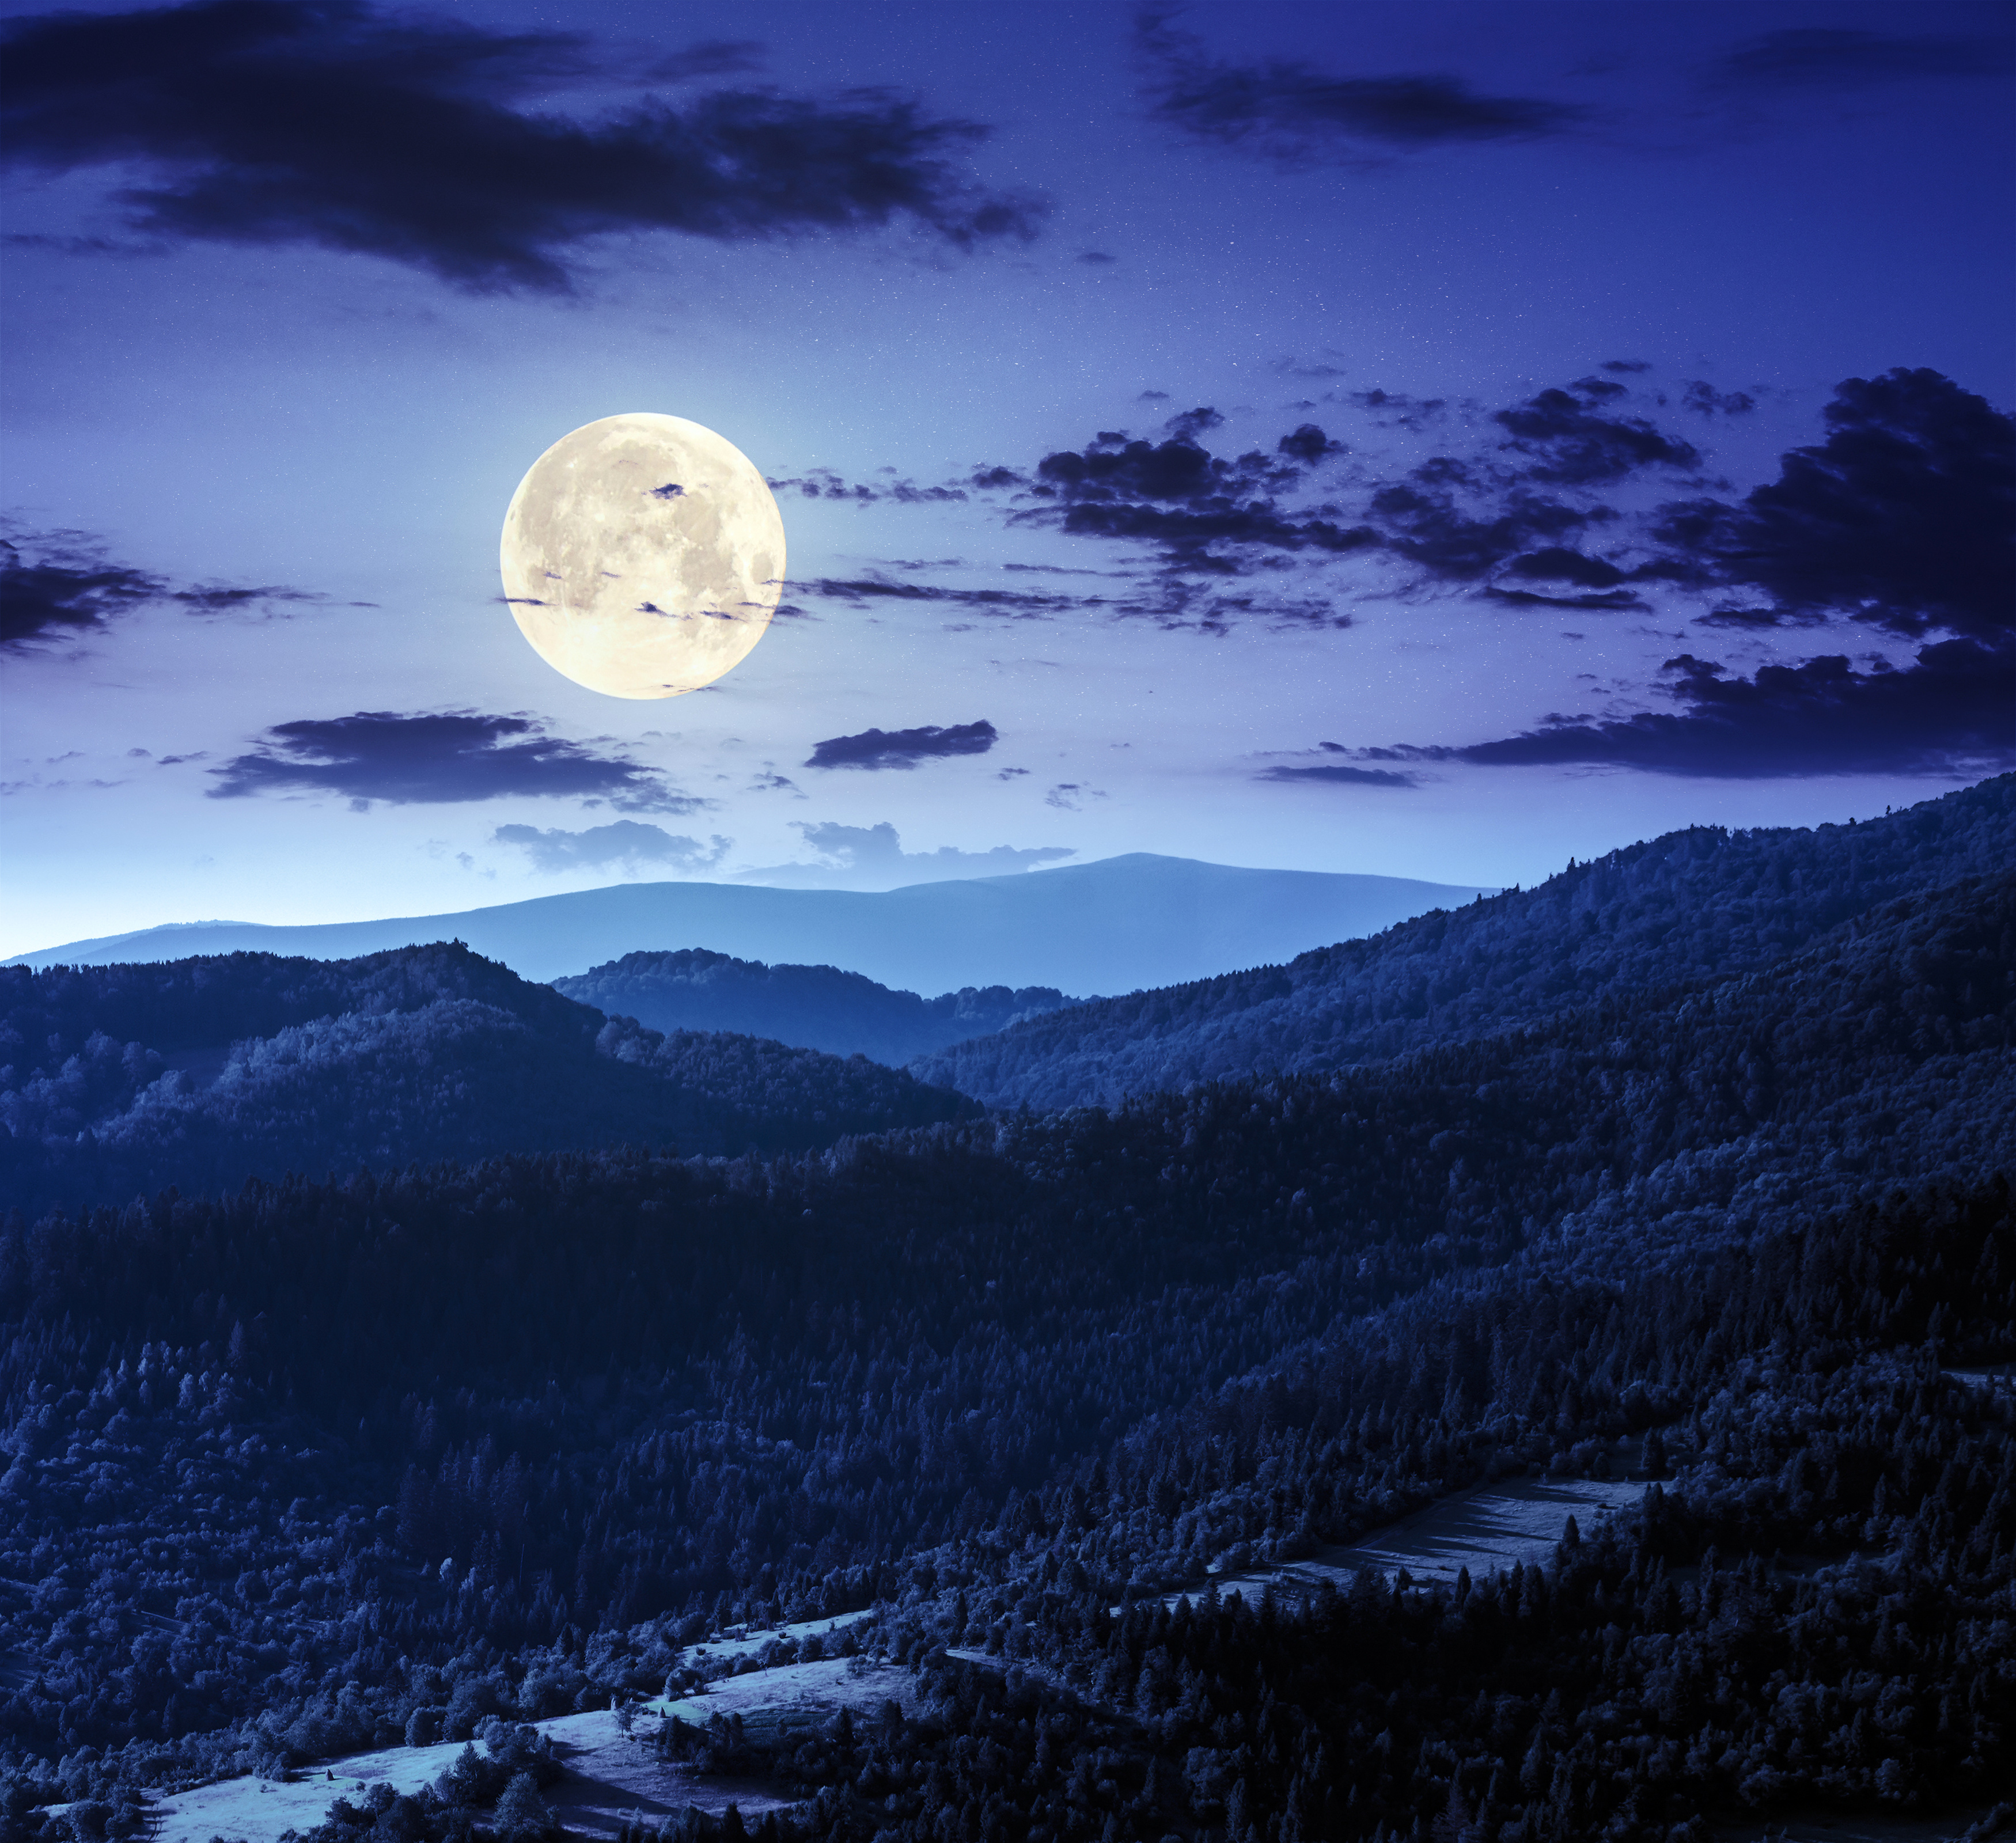 Night Time Nature Landscape With Full Moon